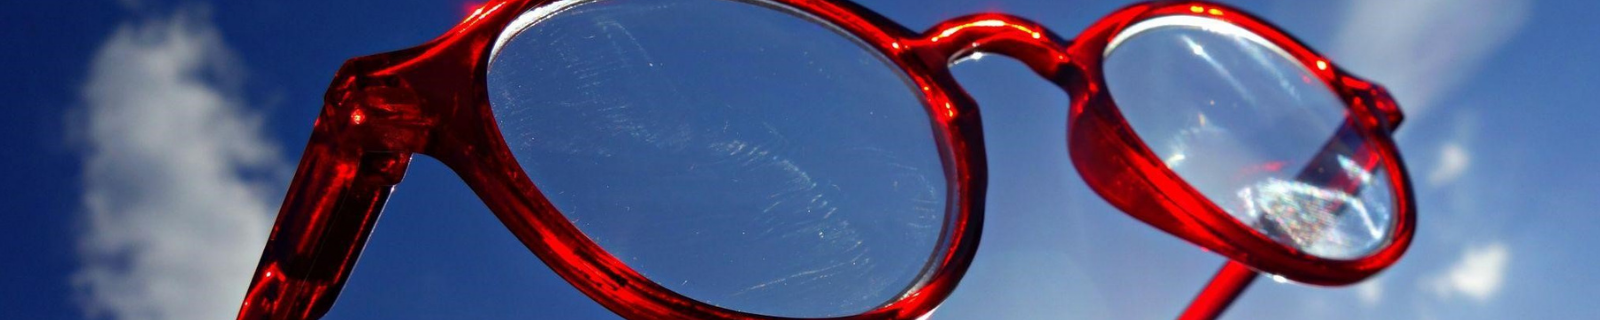 Red glasses held up in the light showing scratched lenses